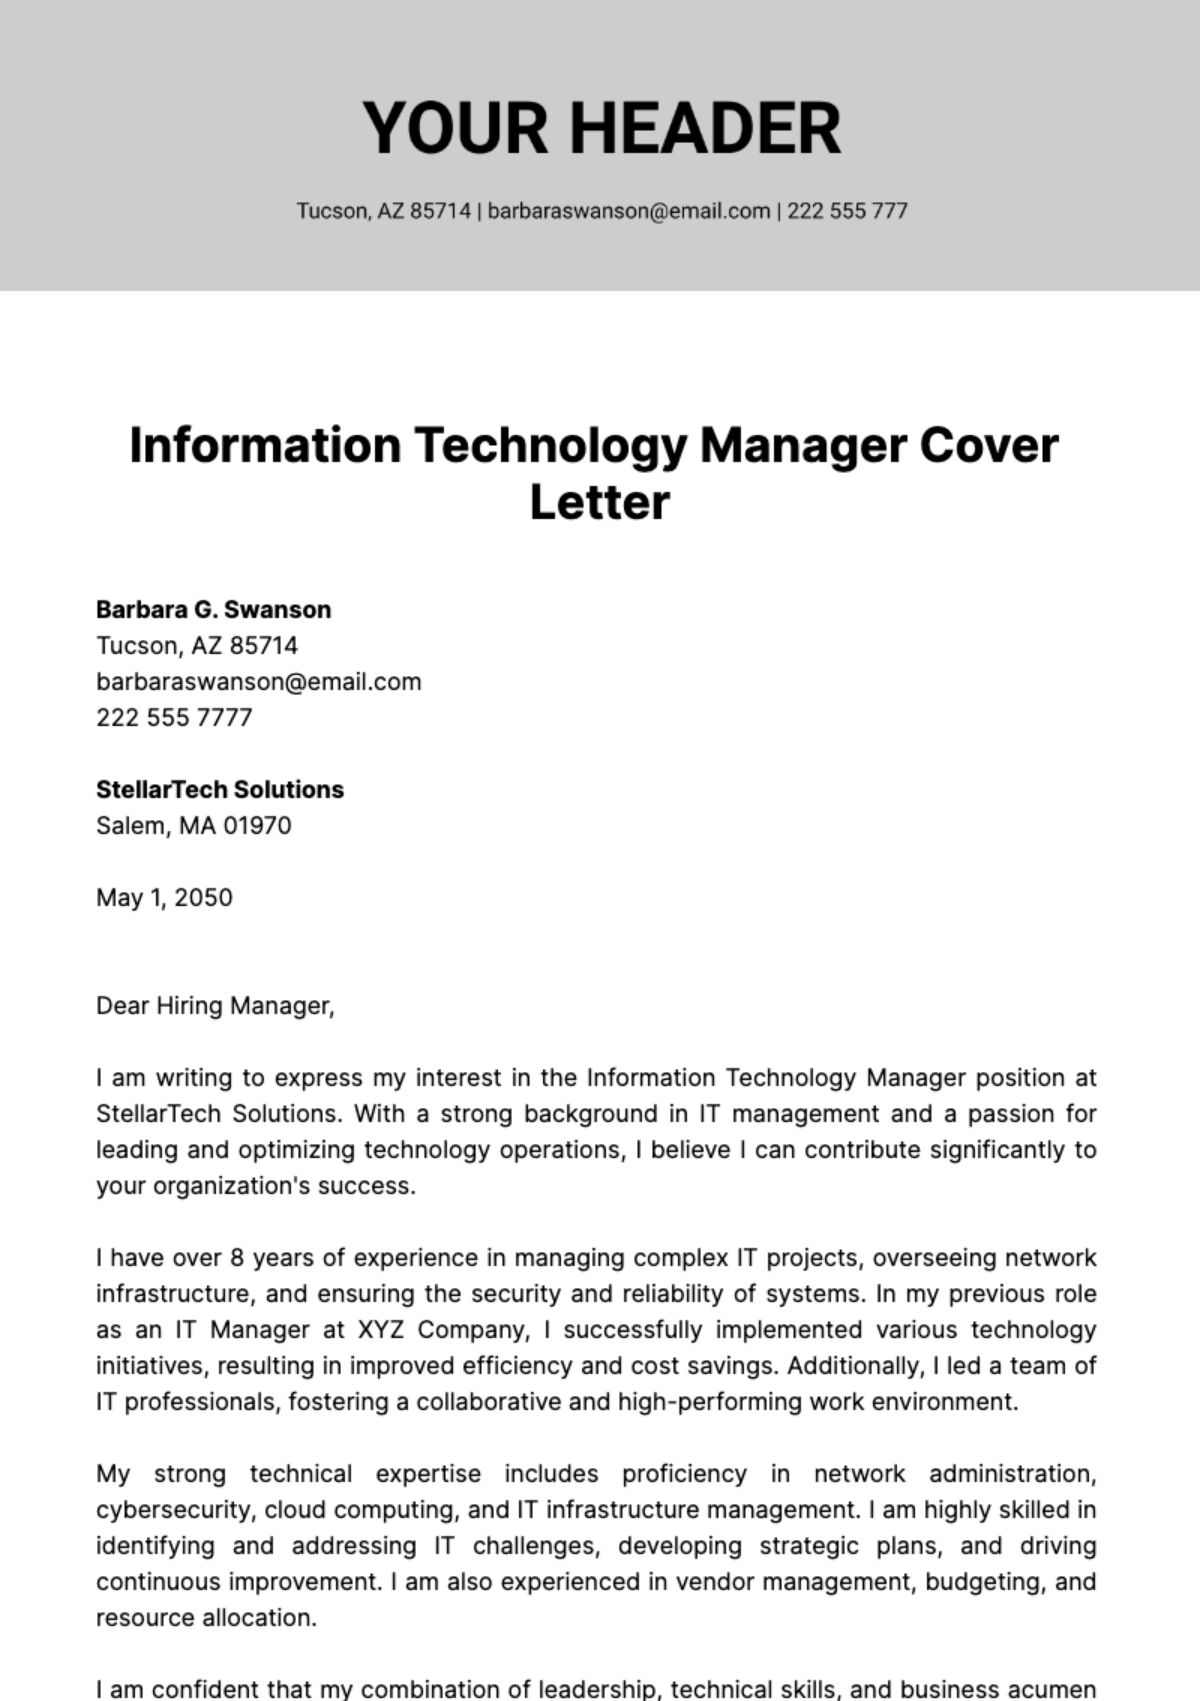 Free Information Technology Manager Cover Letter  Template